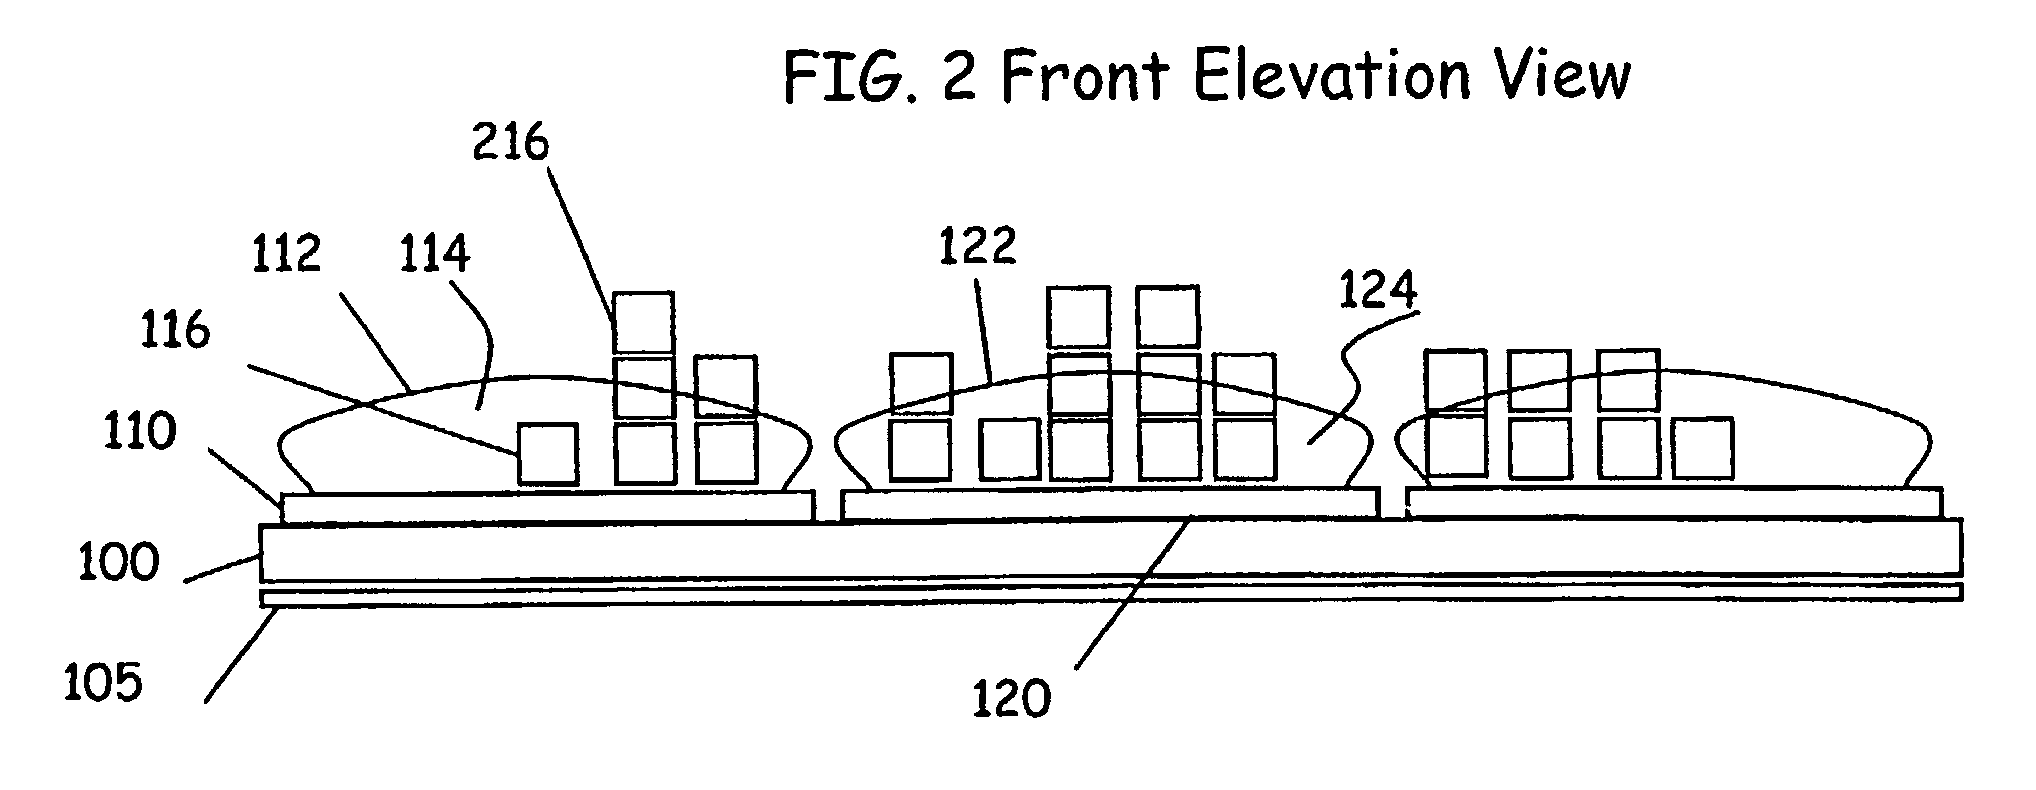 Method of assigning and deducing the location of articles detected by multiple RFID antennae